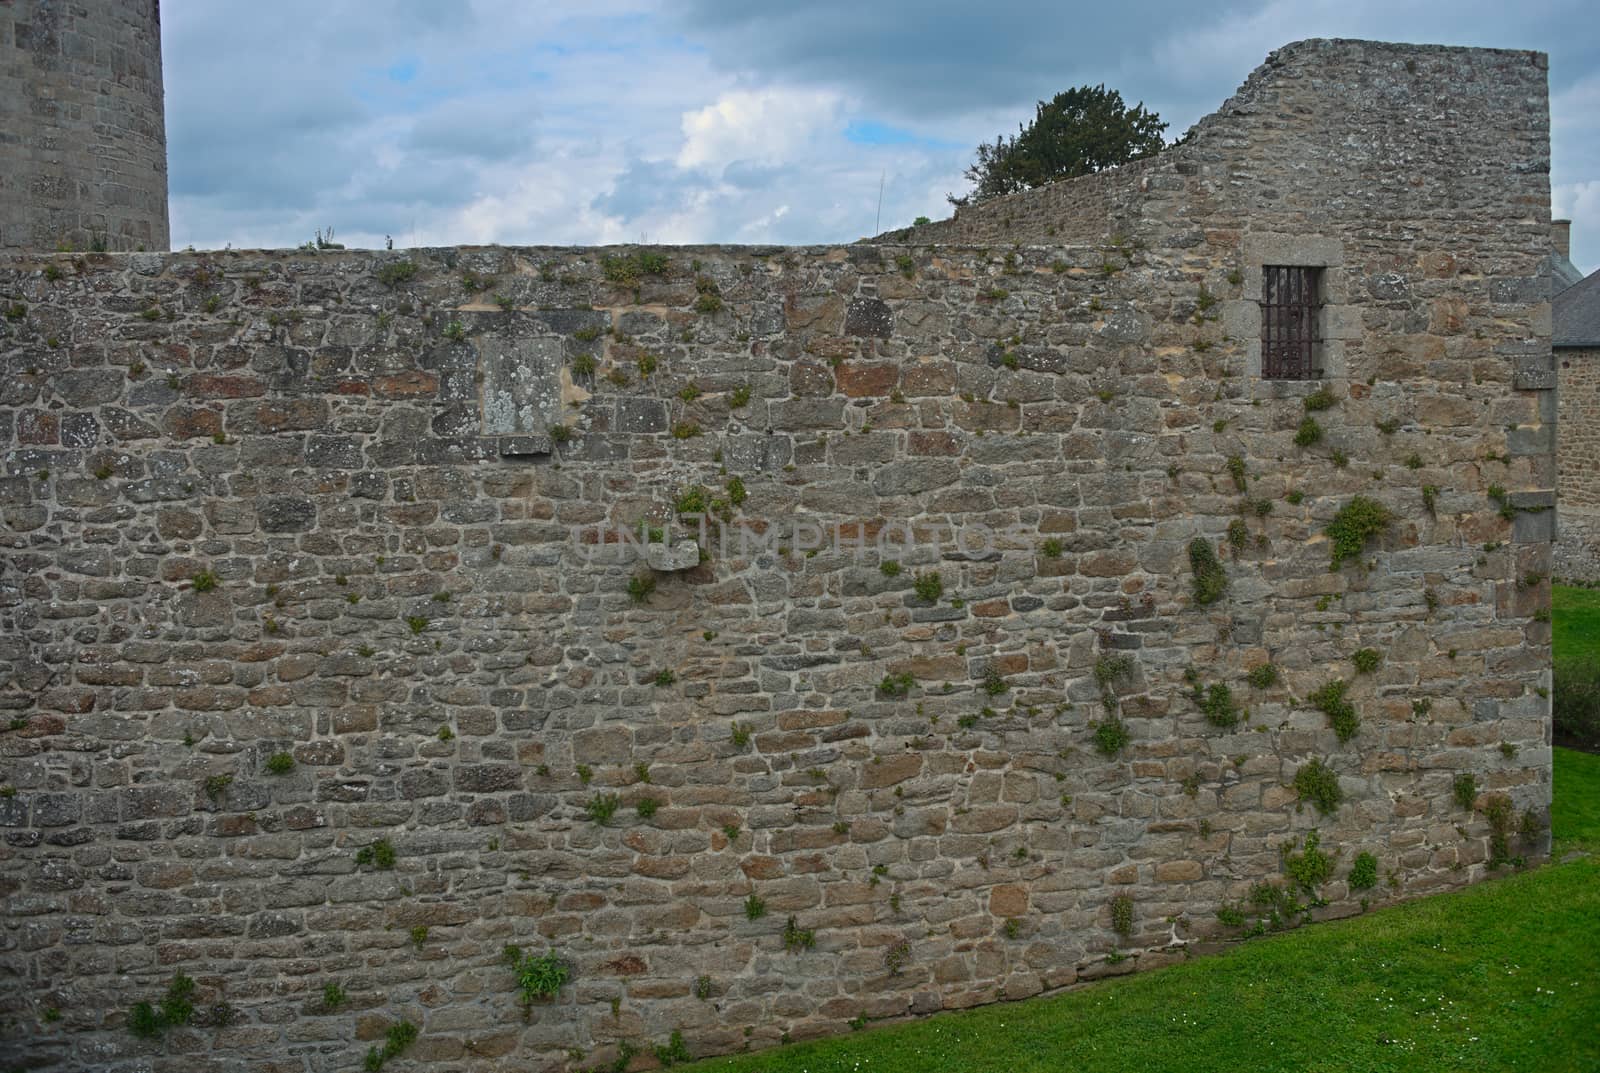 Part of defensive stone wall at middle-age fortress by sheriffkule